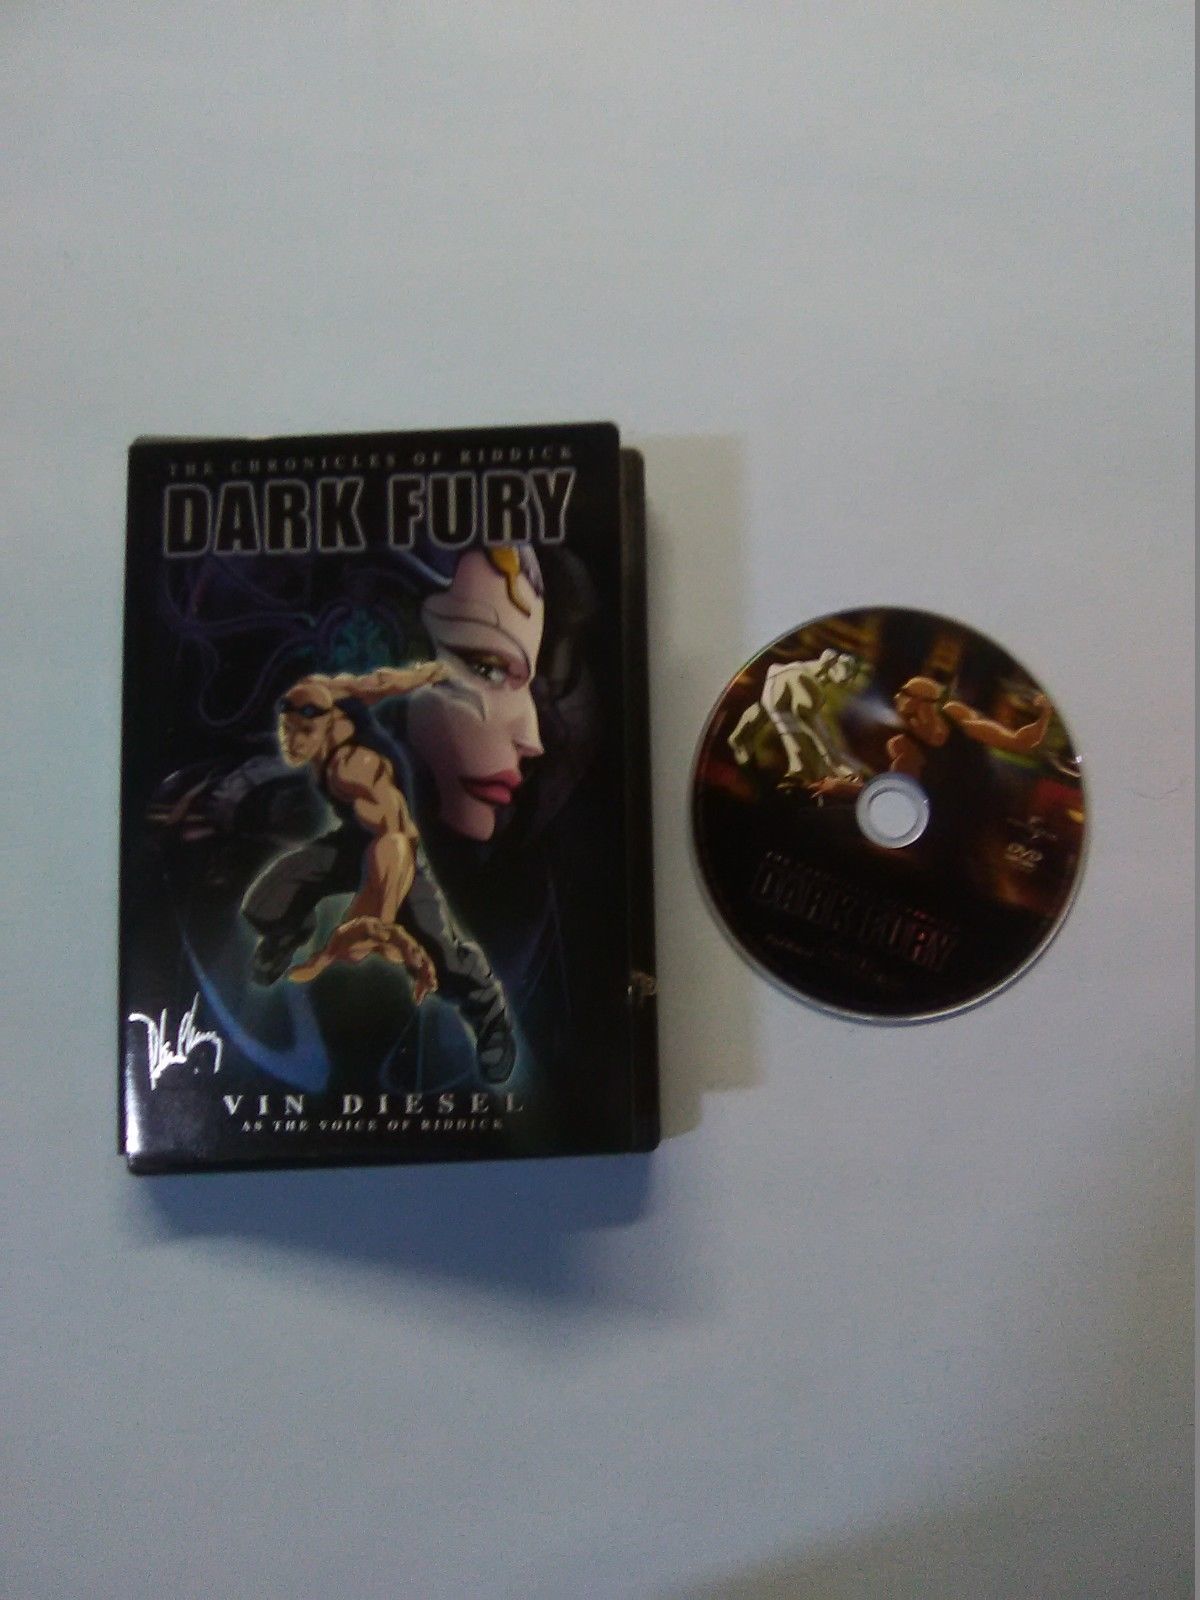 Primary image for The Chronicles of Riddick - Dark Fury (DVD, 2004)